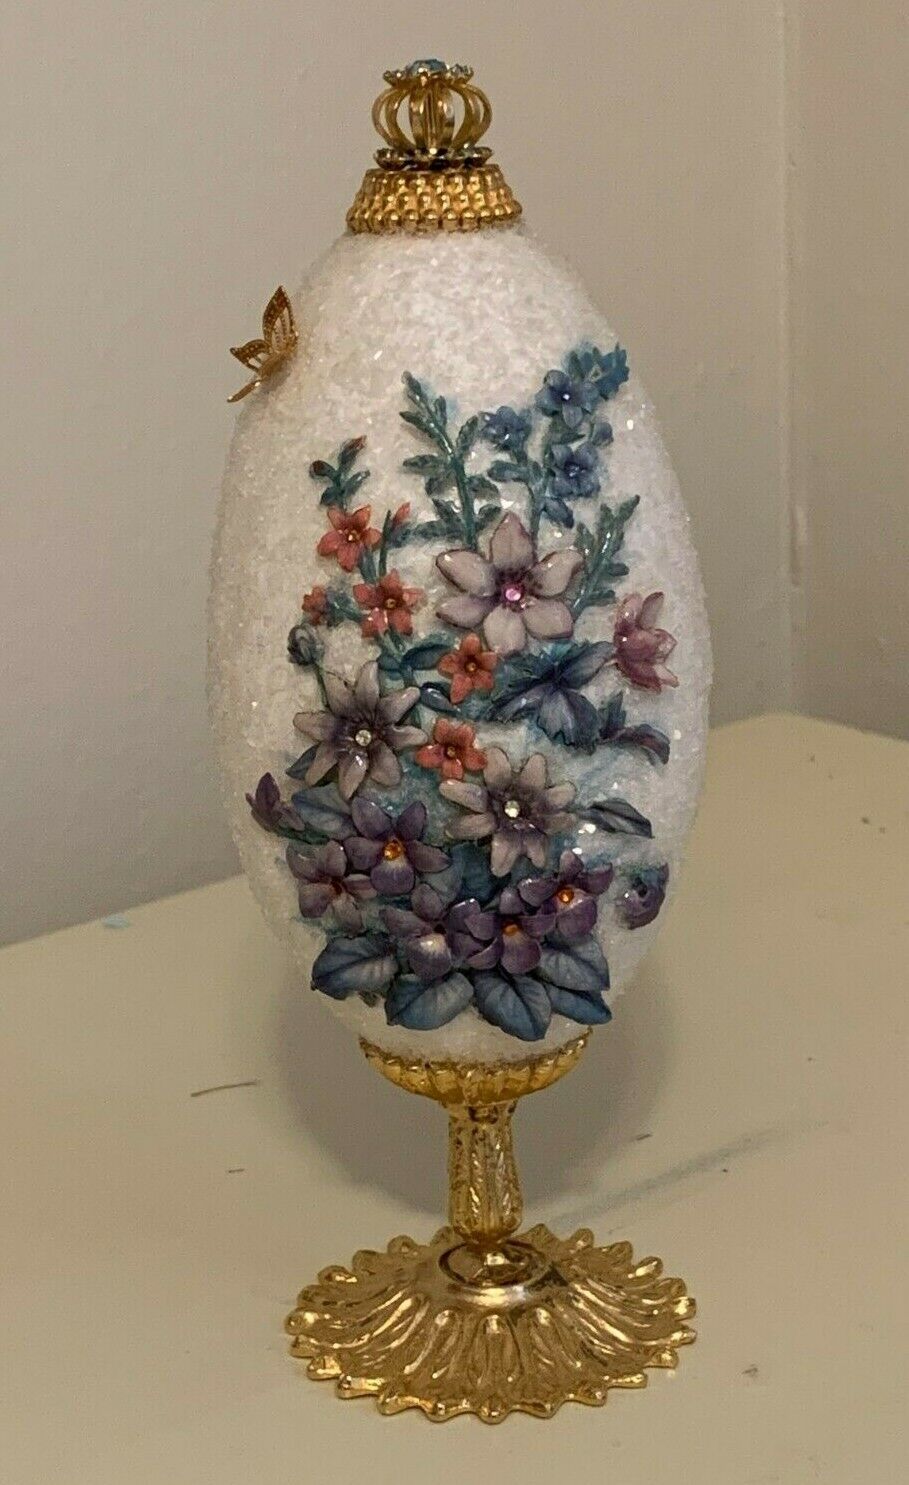 Russian Faberge Inspired Egg Shaped Vintage Decorative Collectible Ornament